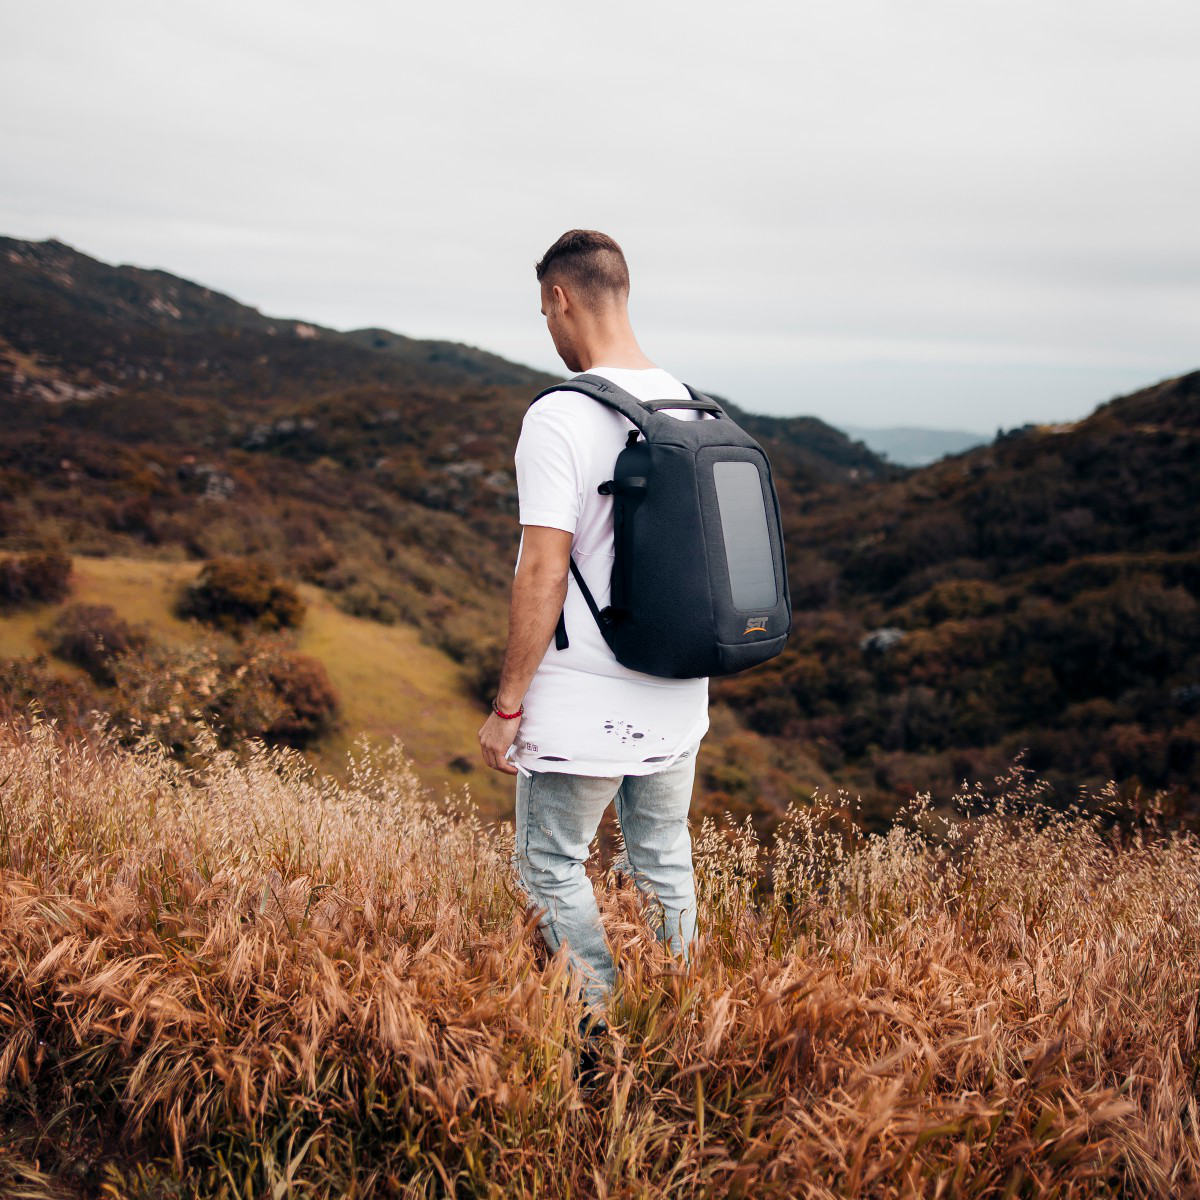 The Numi Pack: Revolutionizing Travel with Smart Design